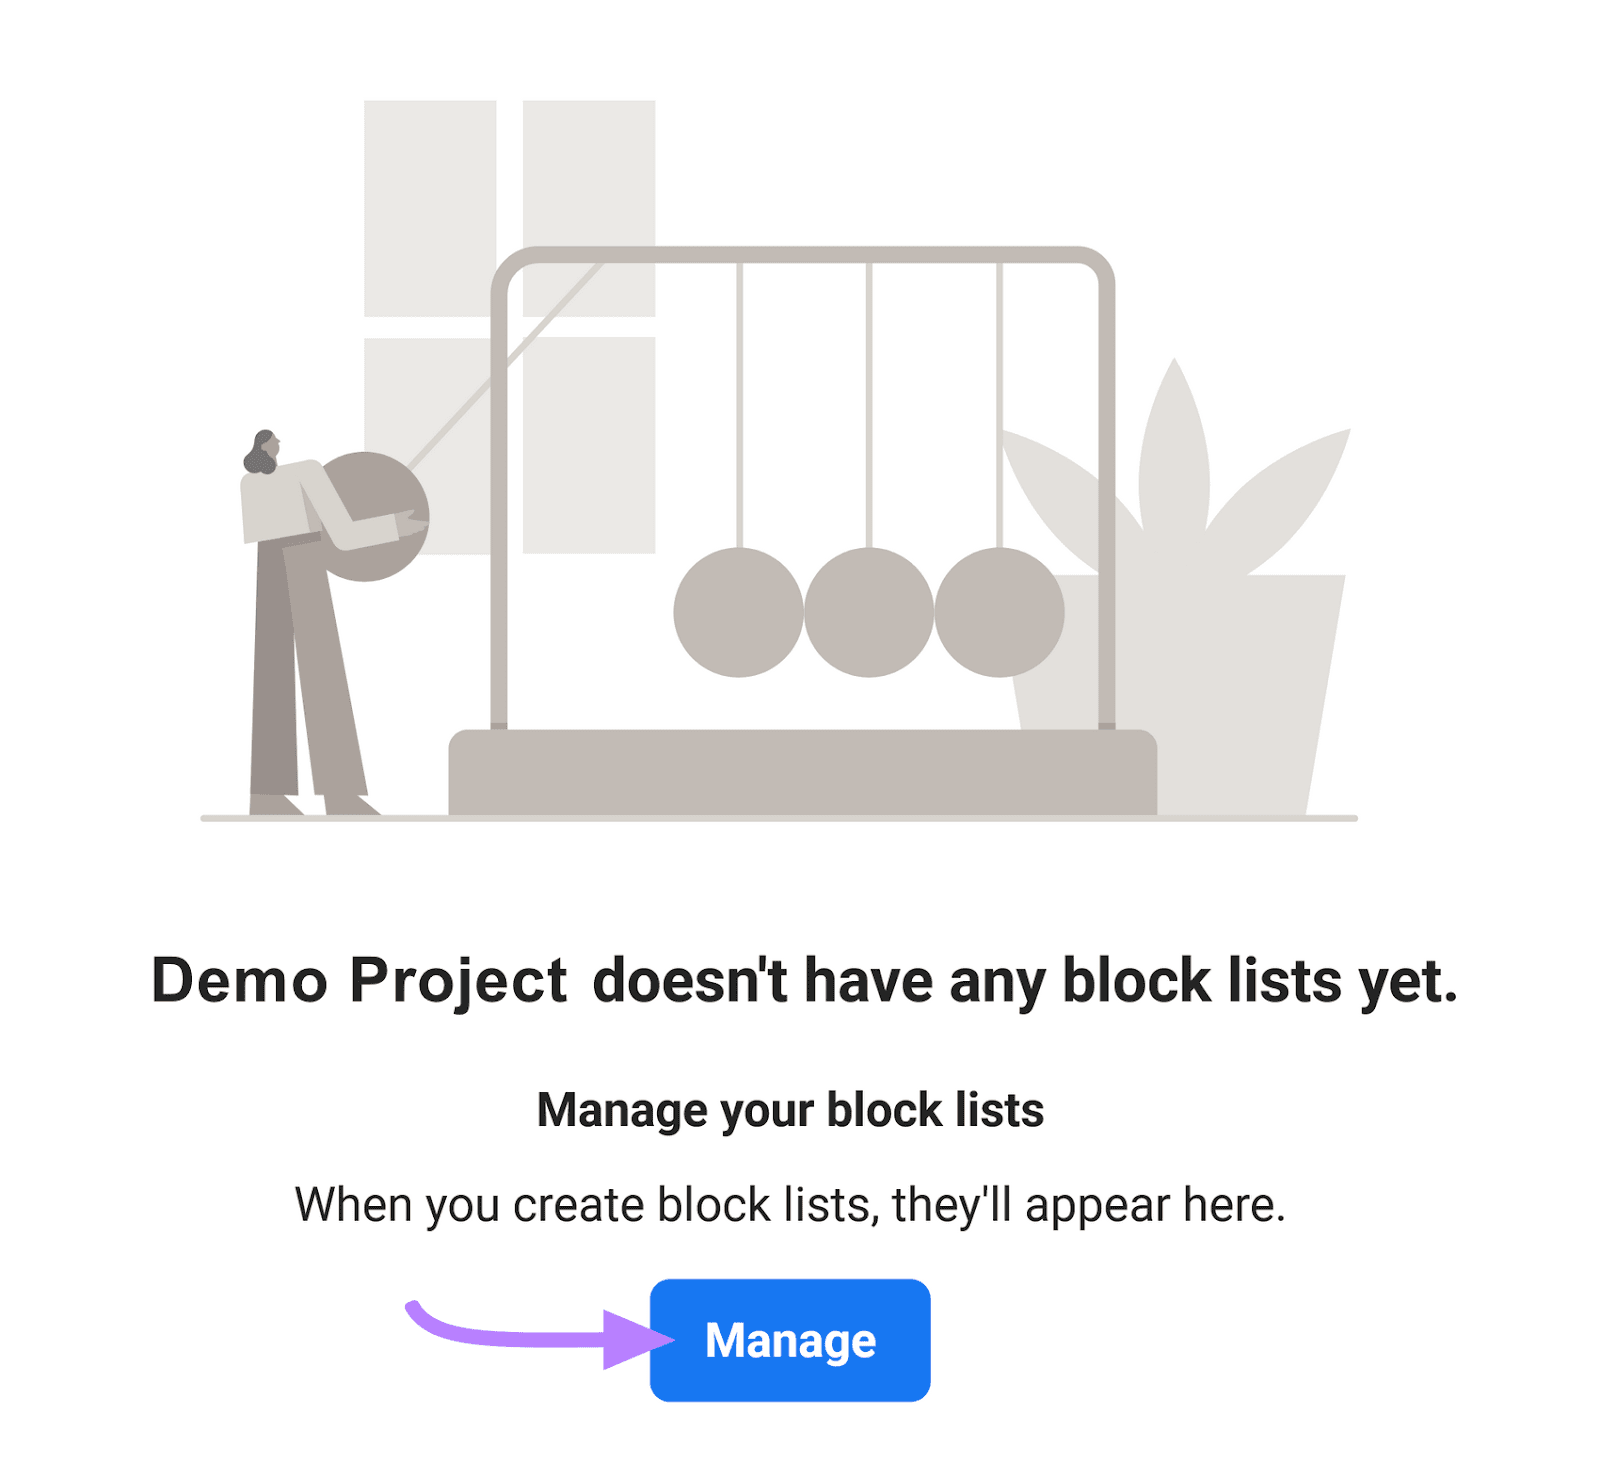 "Manage your block lists" pop-up window